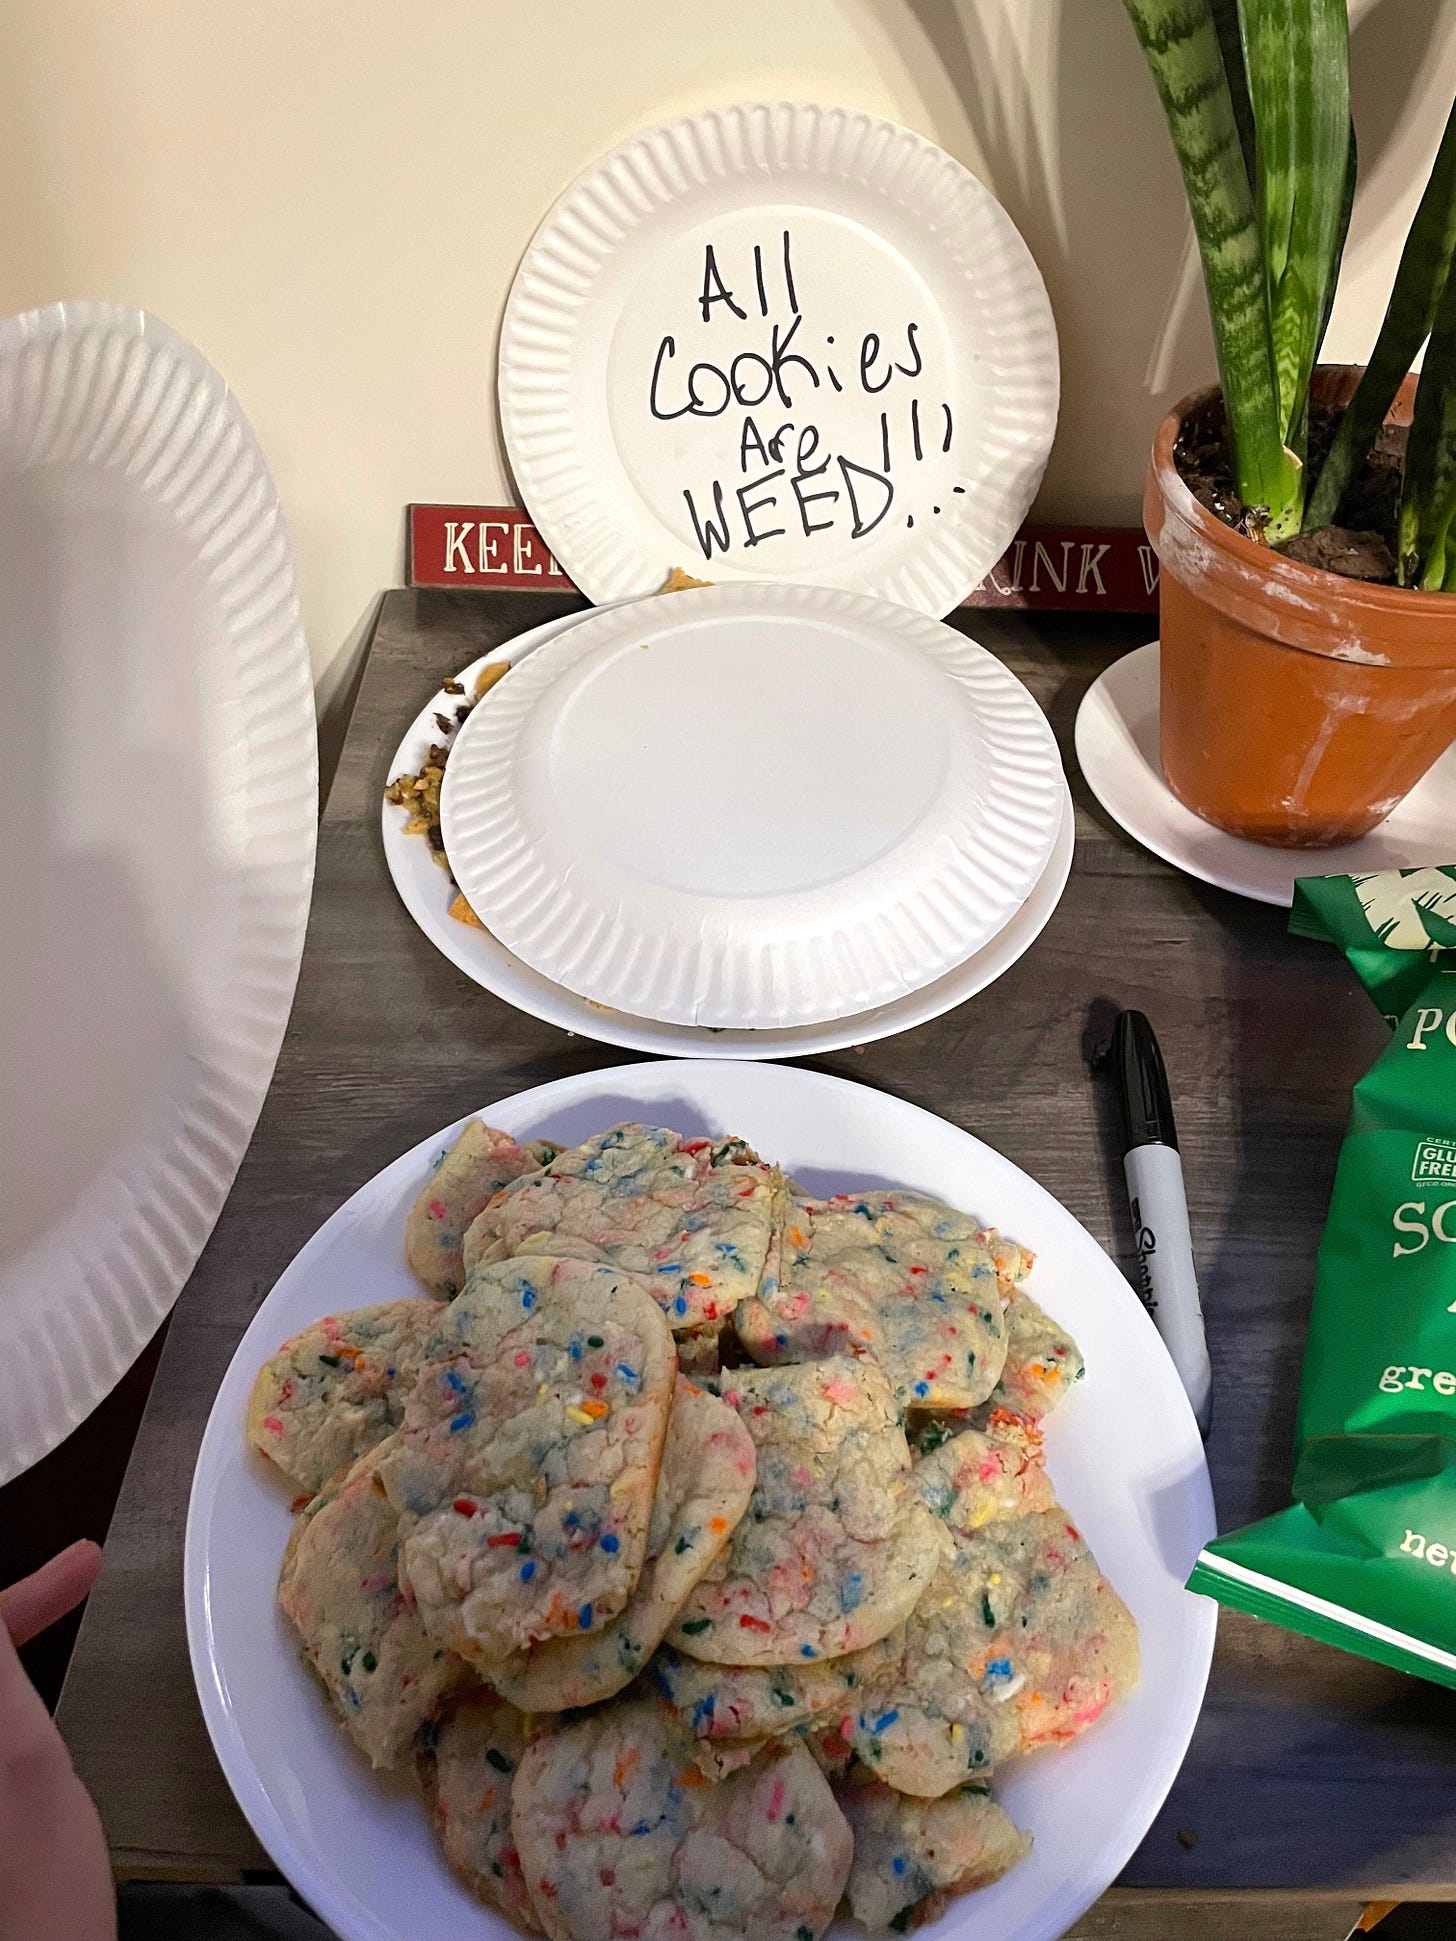 paper plate of cookies next to a paper plate with "All cookies are weed" written on it